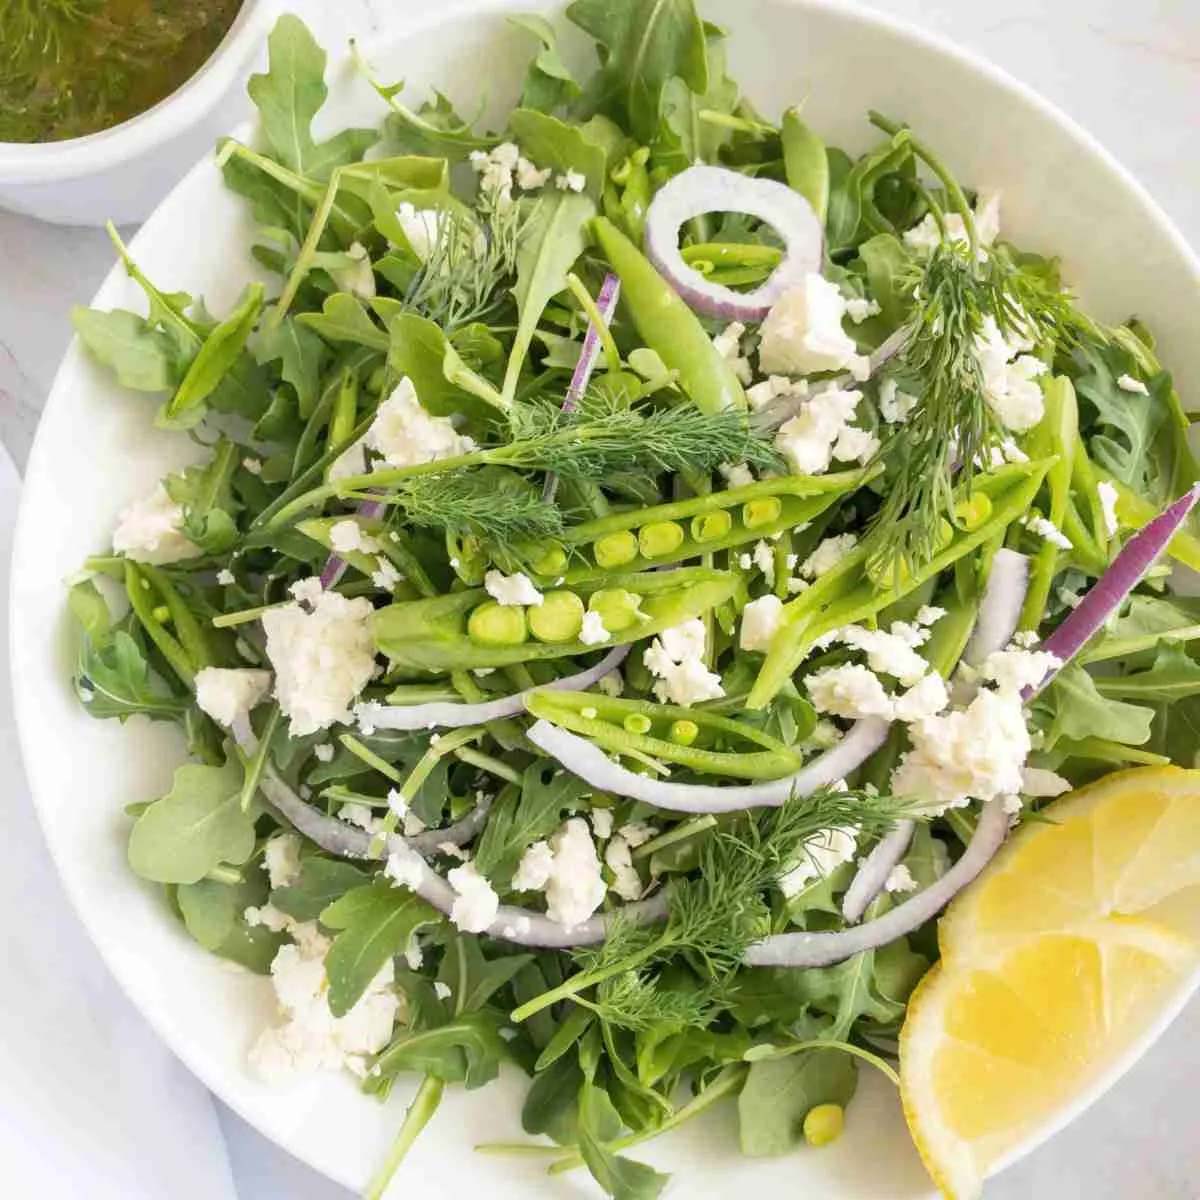 Snap pea and arugula salad in a white bowl with a lemon wedge.